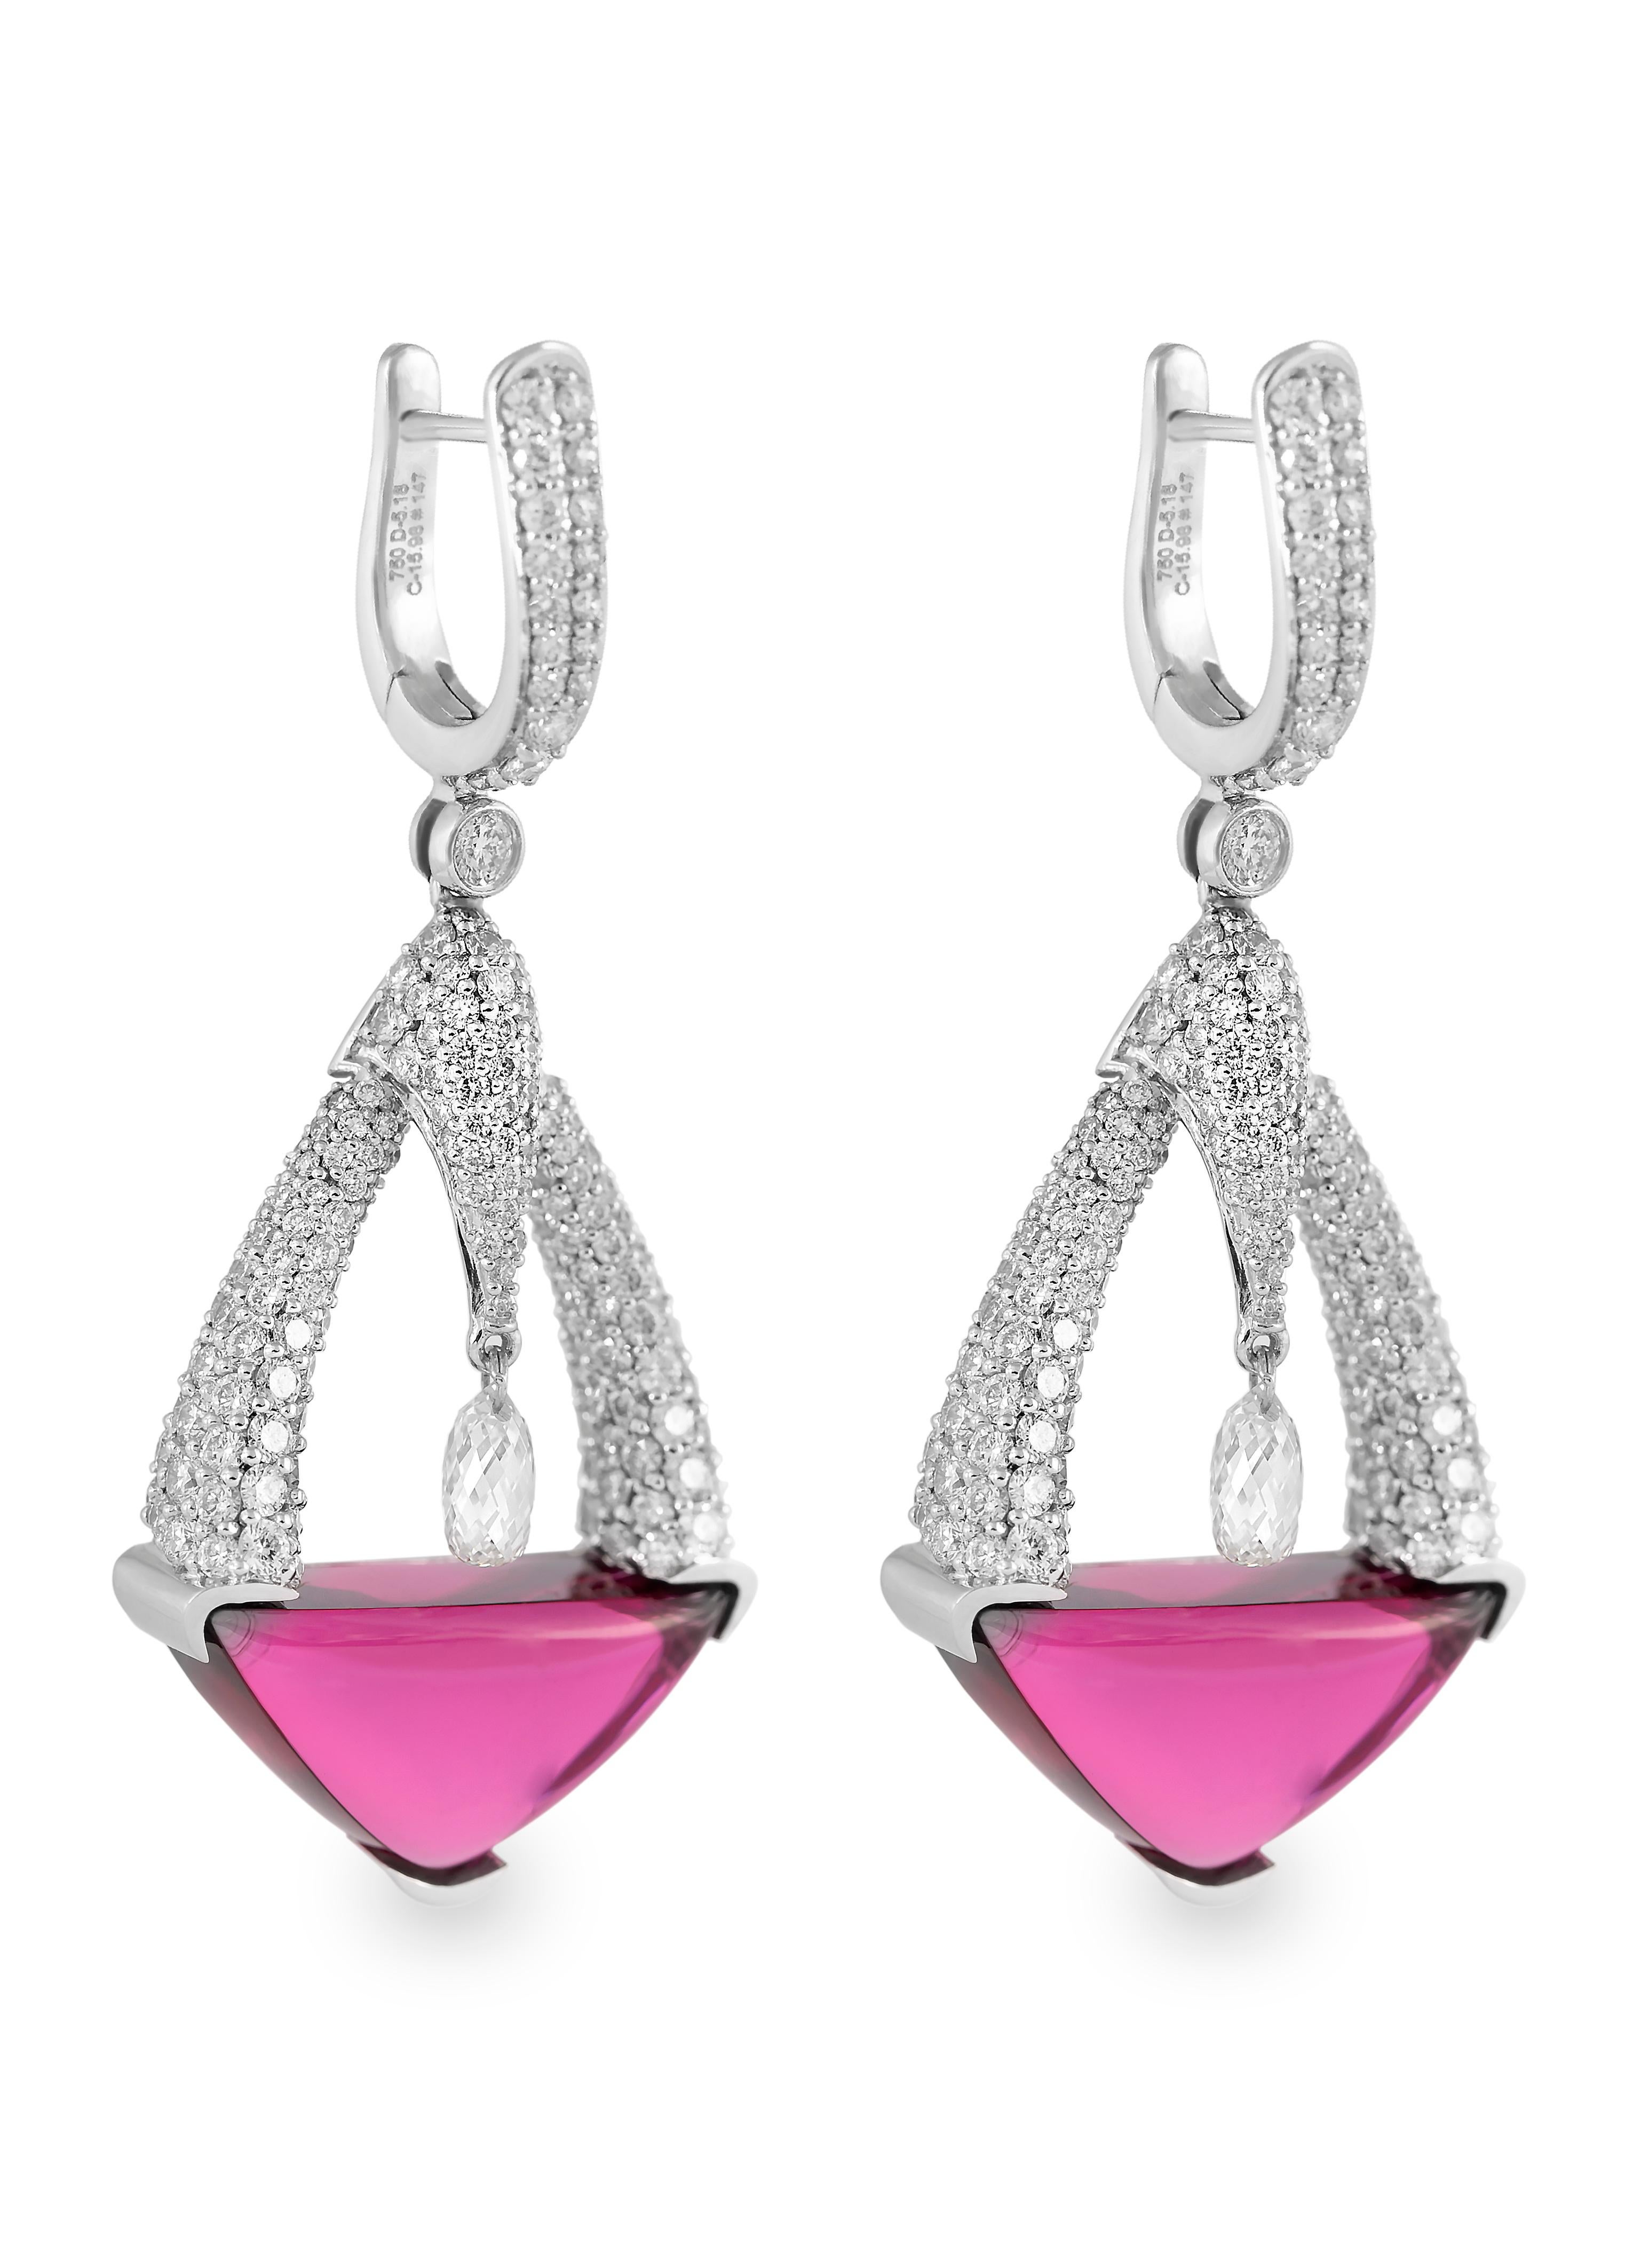 These stunning earrings in 18 karat white gold by Atelo contain diamond briolettes that delicately dangle above two magnificent, triangular rubelites.

The diamonds briolettes are set so that they “dance” over the rubelites. Elegant, diamond-set